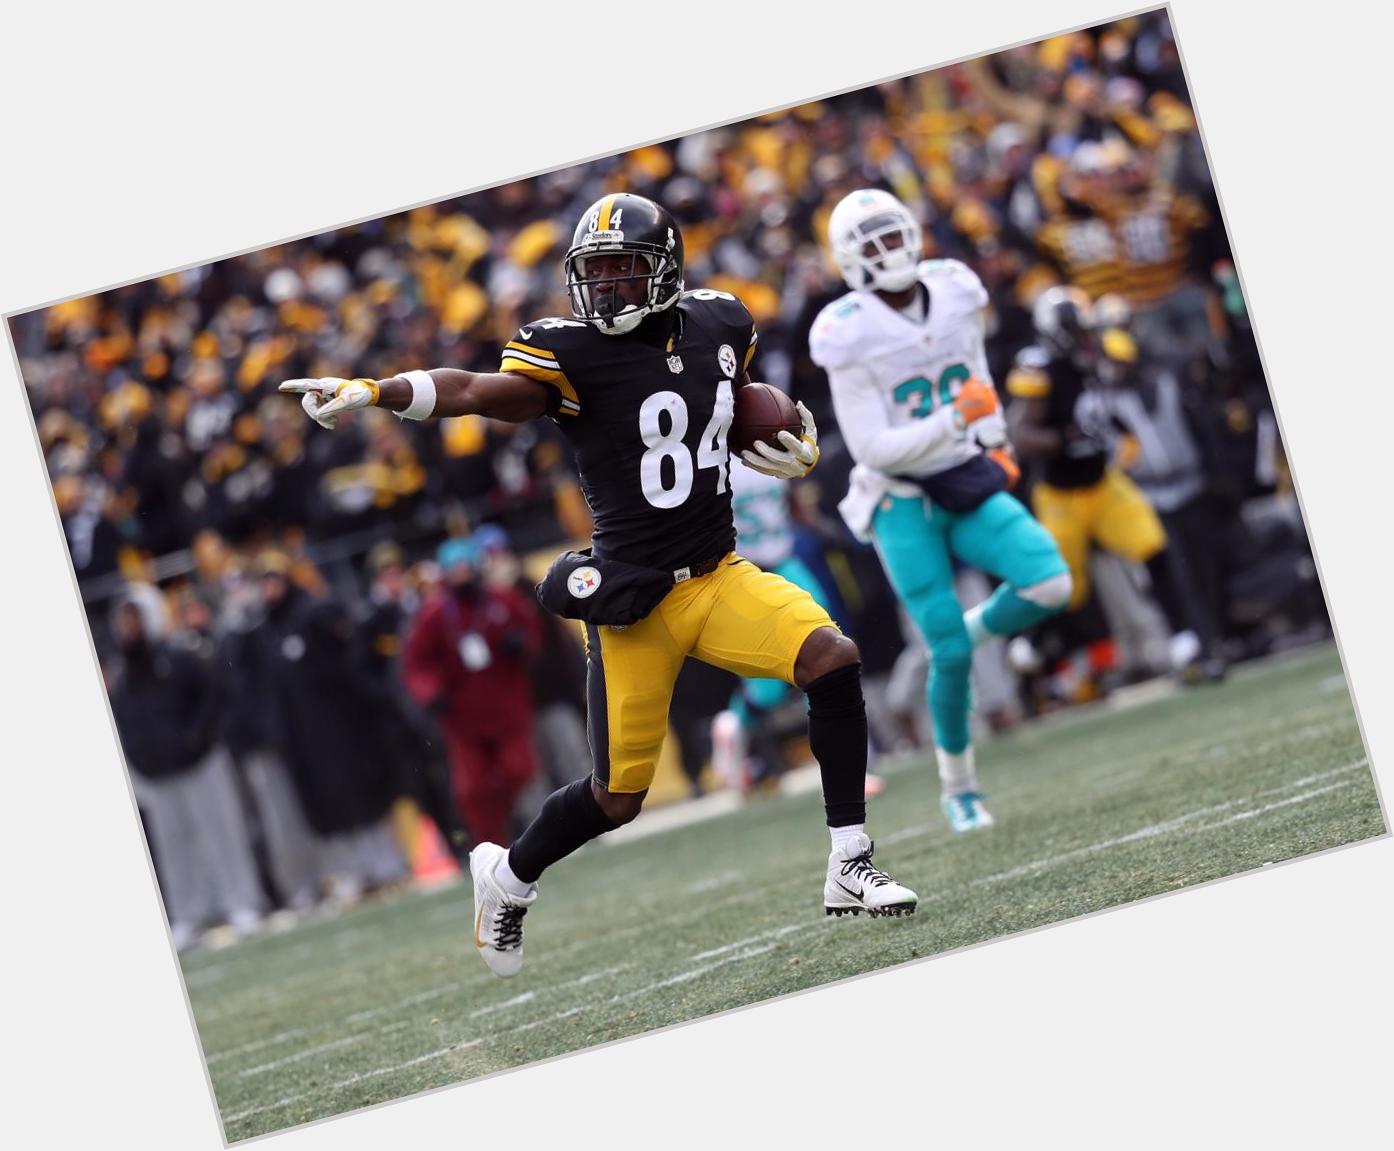 Happy Birthday to Antonio Brown who turns 29 today! 